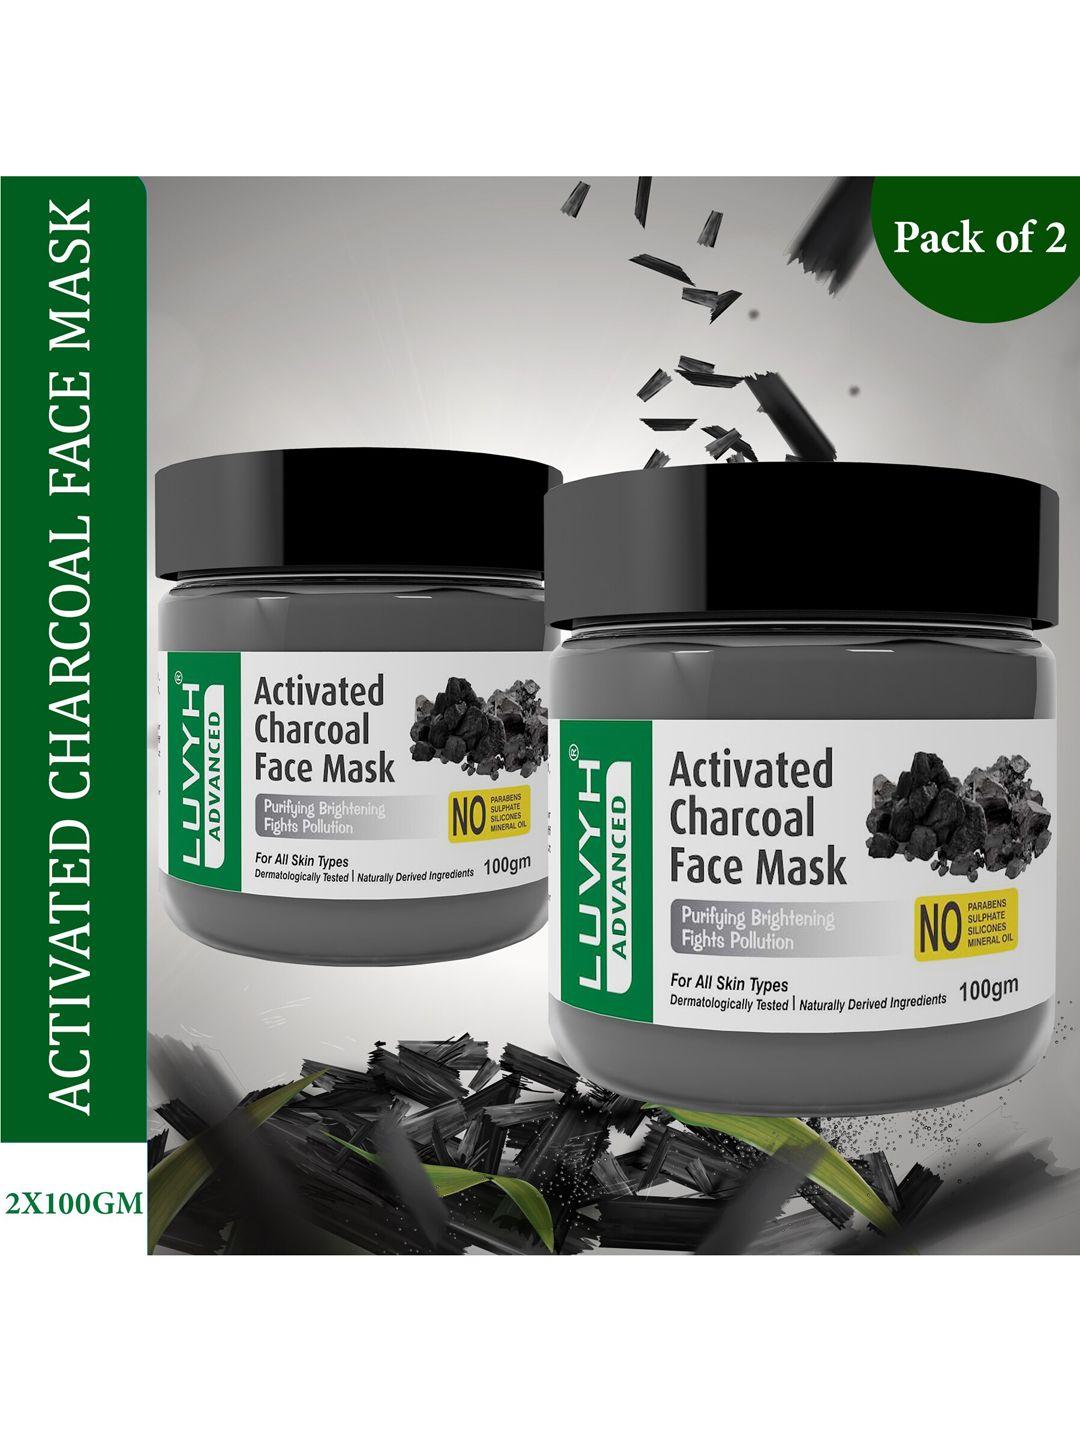 luvyh set of 2 activated charcoal face mask 200g